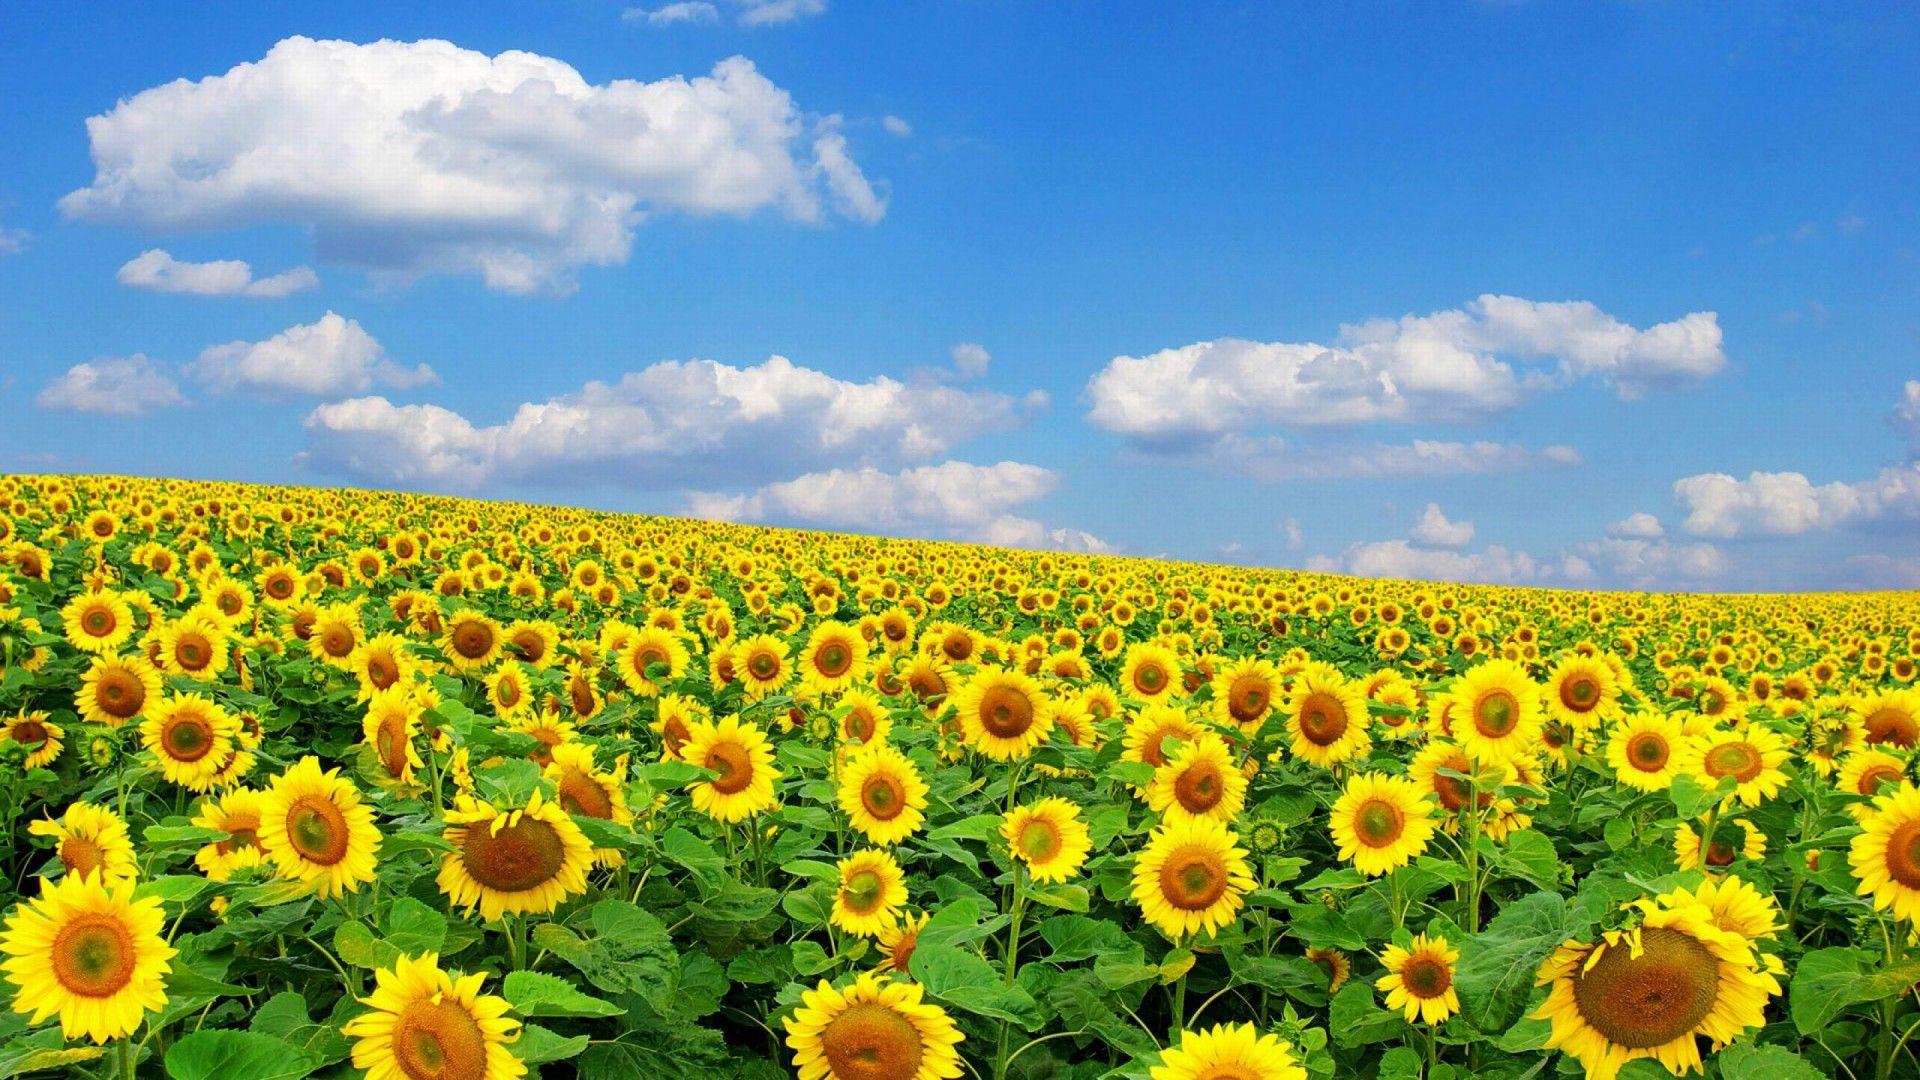 Field Of Sunflowers Wallpaper HD For Desktop and Mobile